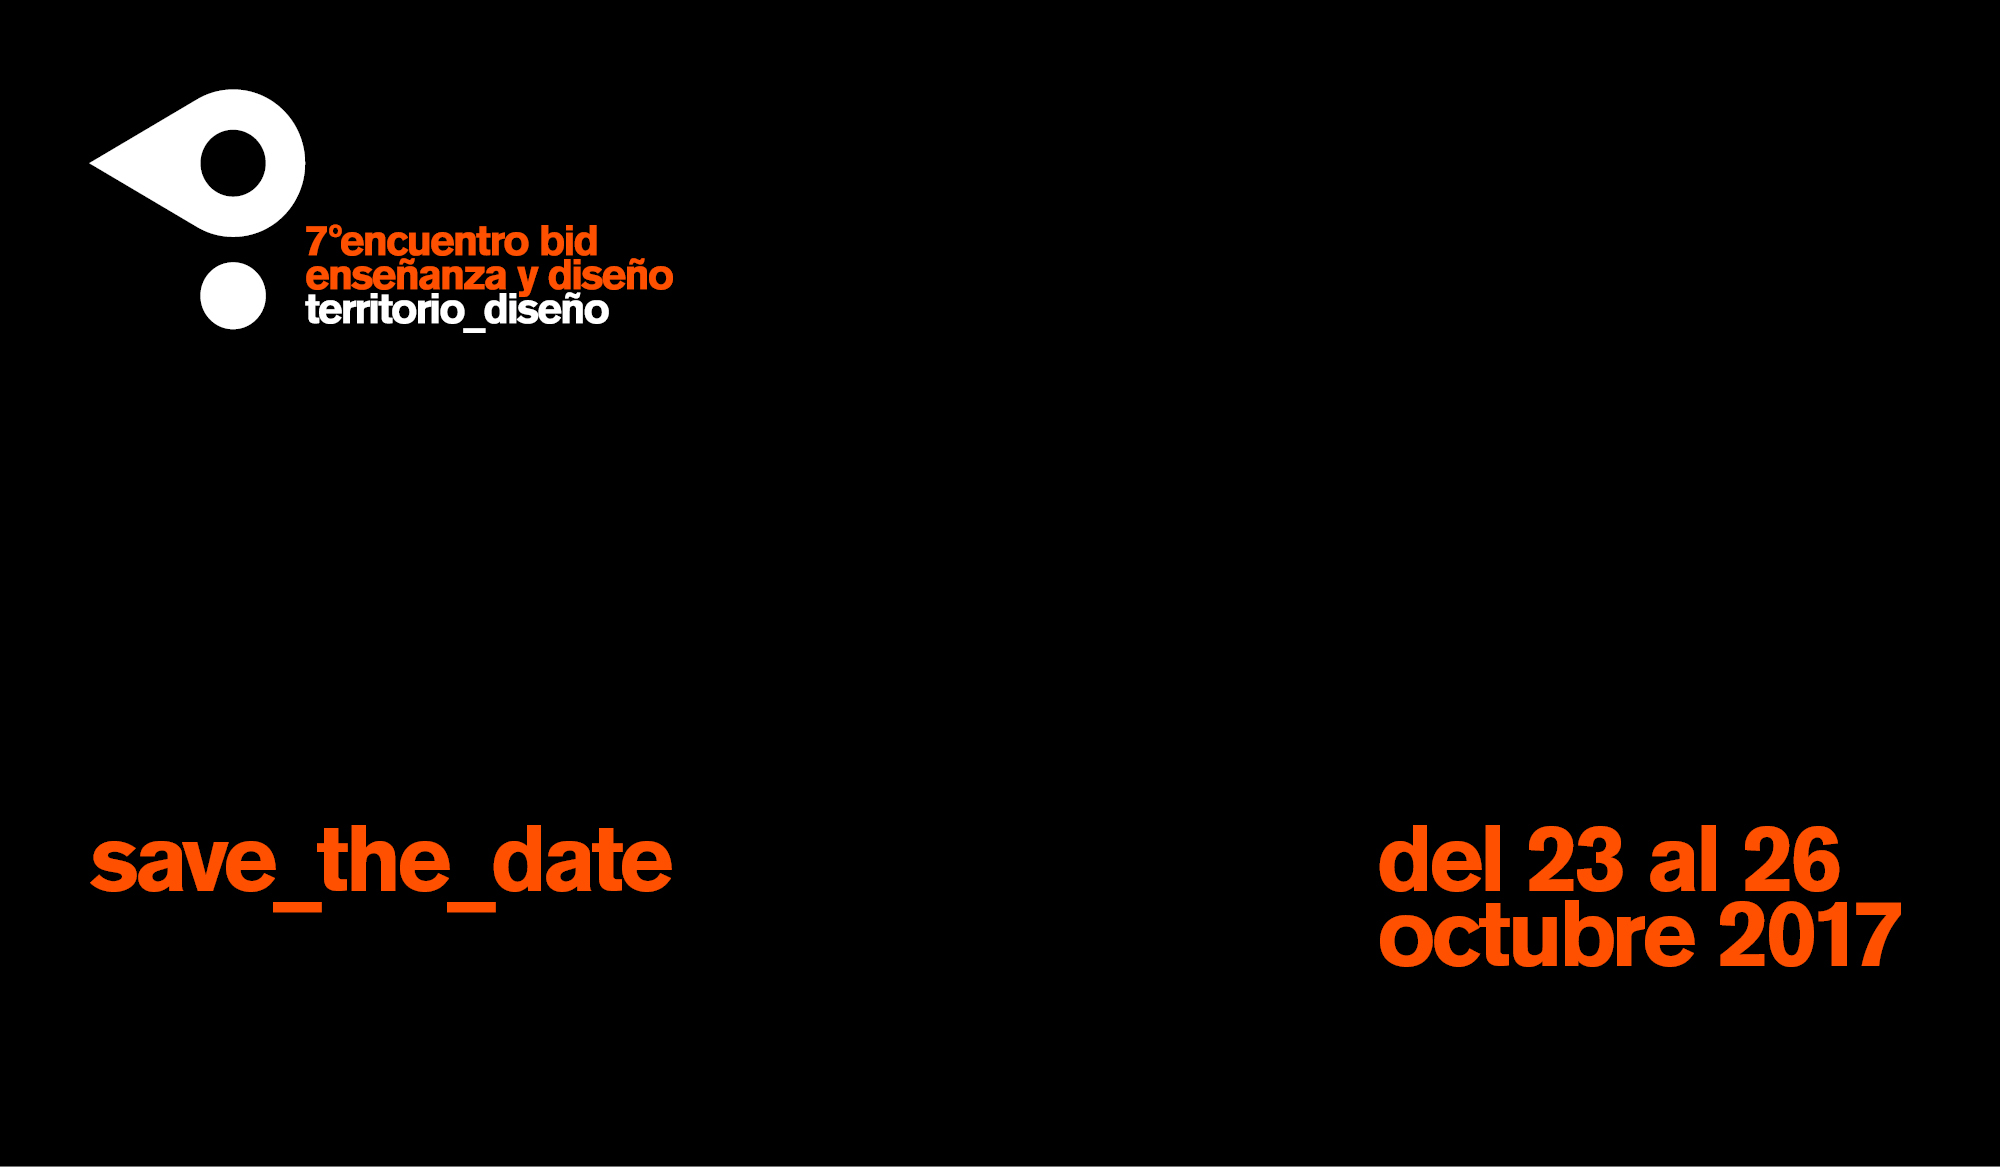 SAVE THE DATE PARA 6º ENCUENTRO